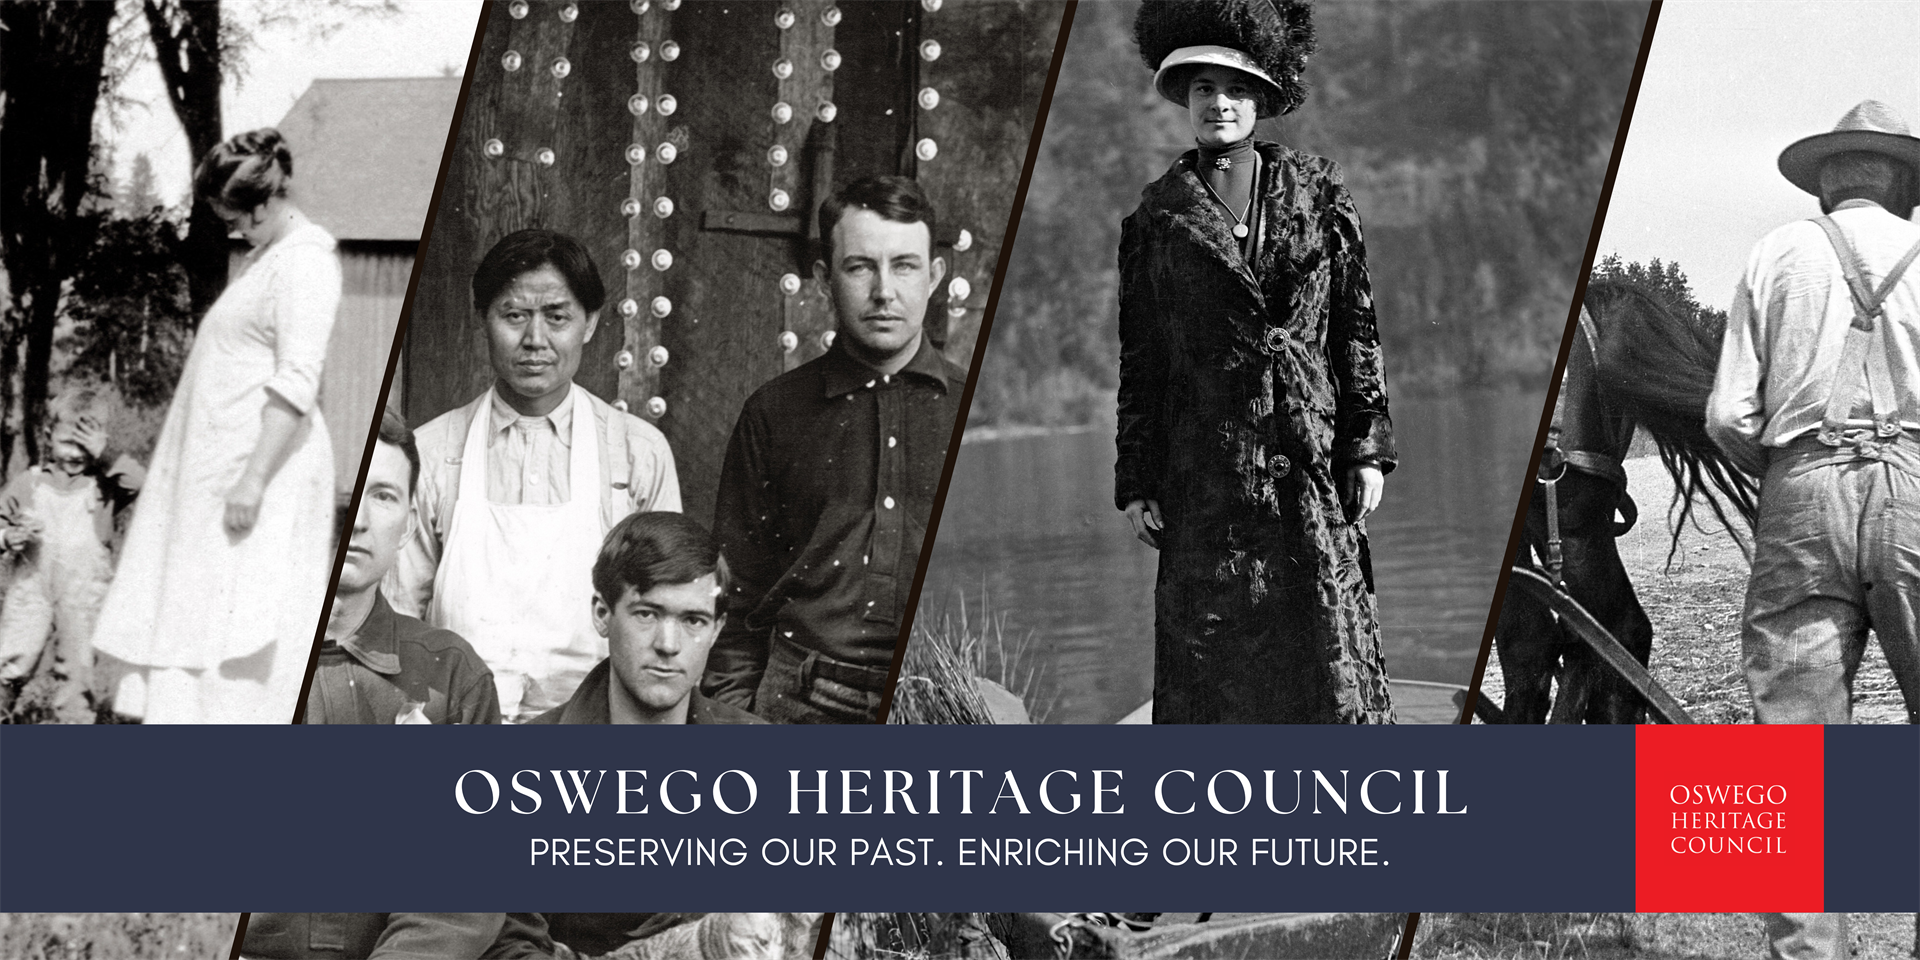 Website header with four photographs and the words "Oswego Heritage Council: Preserving our past, enriching our future." From left to right, the black and white historic photographs include: a pregnant woman on a farm looking down at a toddler in overalls with his hand over his face, a group of four men (three white workers and one Chinese worker) with one man holding a cat, a woman in a long coat and large hat standing in a small wooden boat on a lake, and the back of a farmer in a field as he works with a horse.